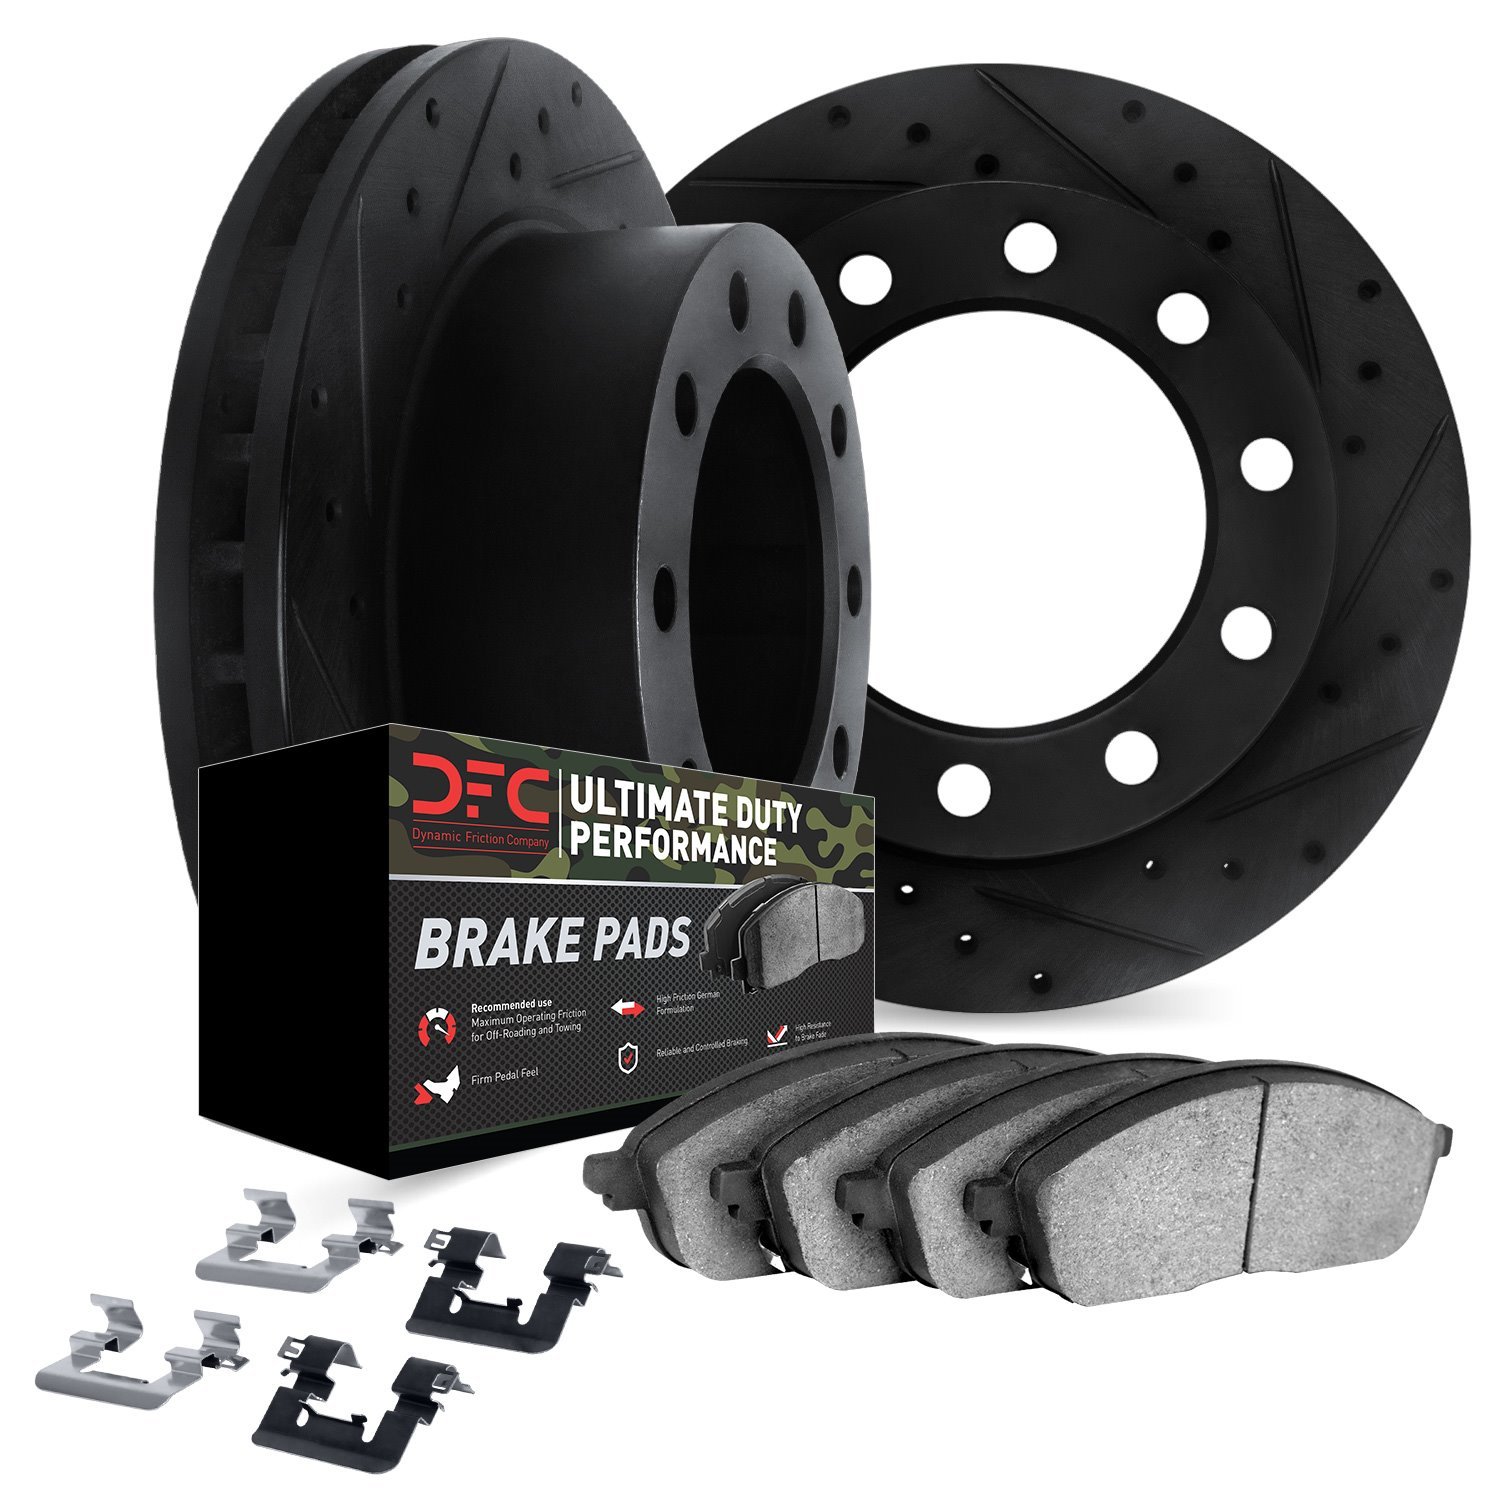 8412-54111 Drilled/Slotted Brake Rotors with Ultimate-Duty Brake Pads Kit & Hardware [Black], Fits Select Ford/Lincoln/Mercury/M